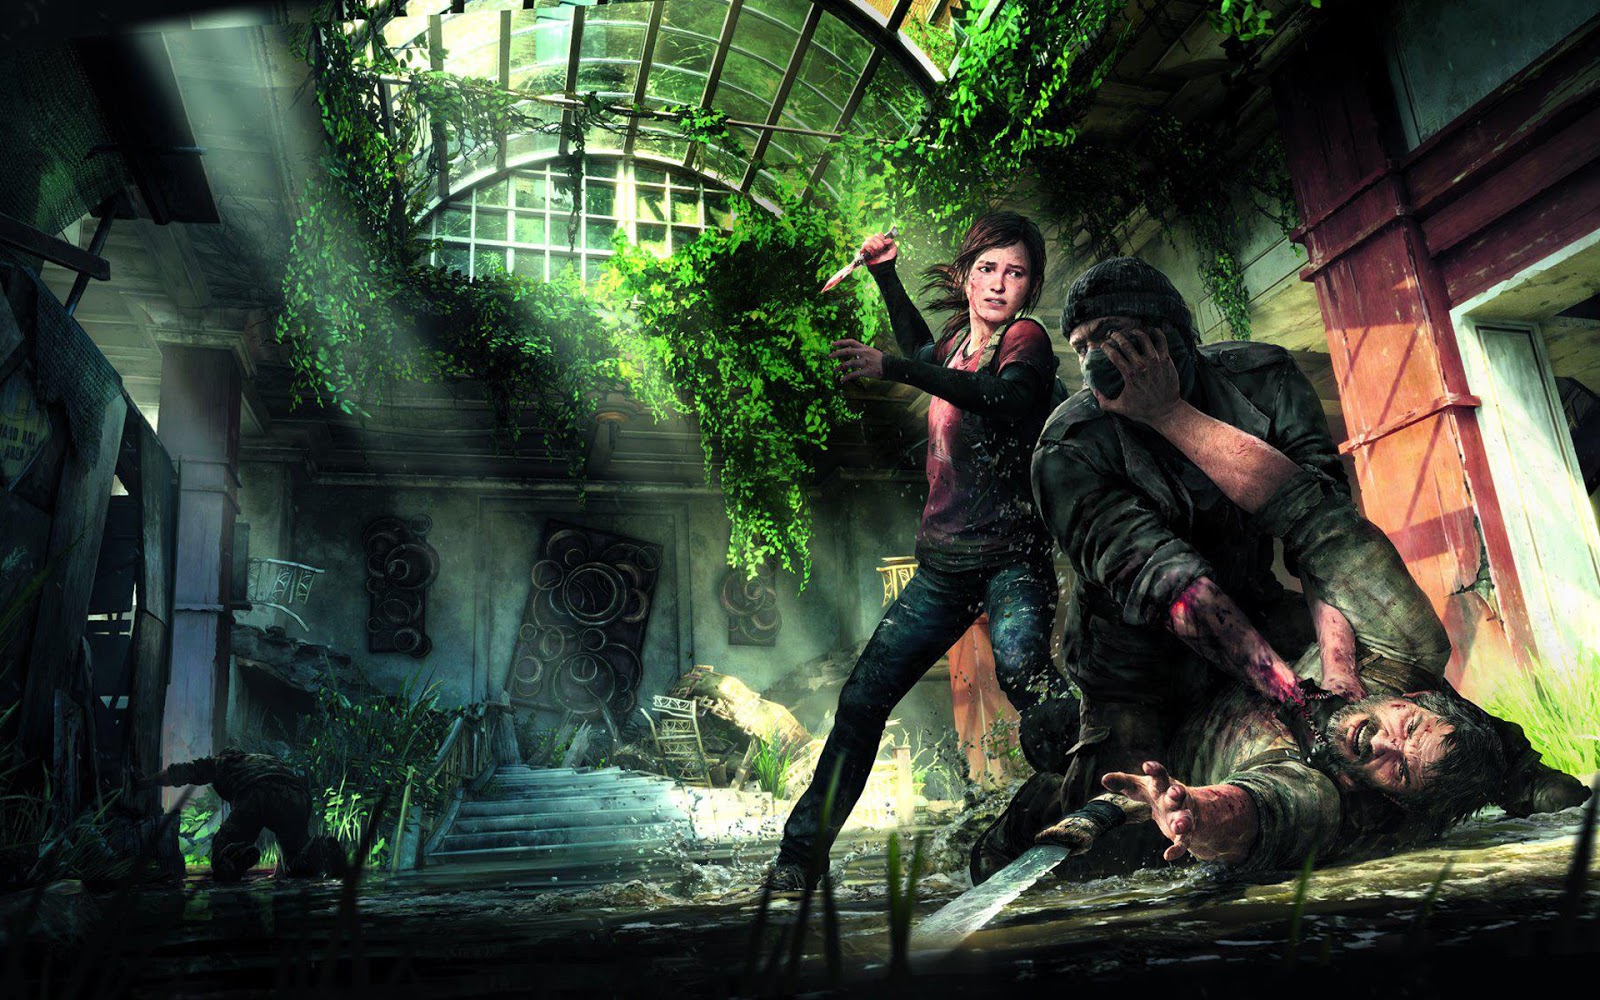 The Last Of Us Registration Code 13